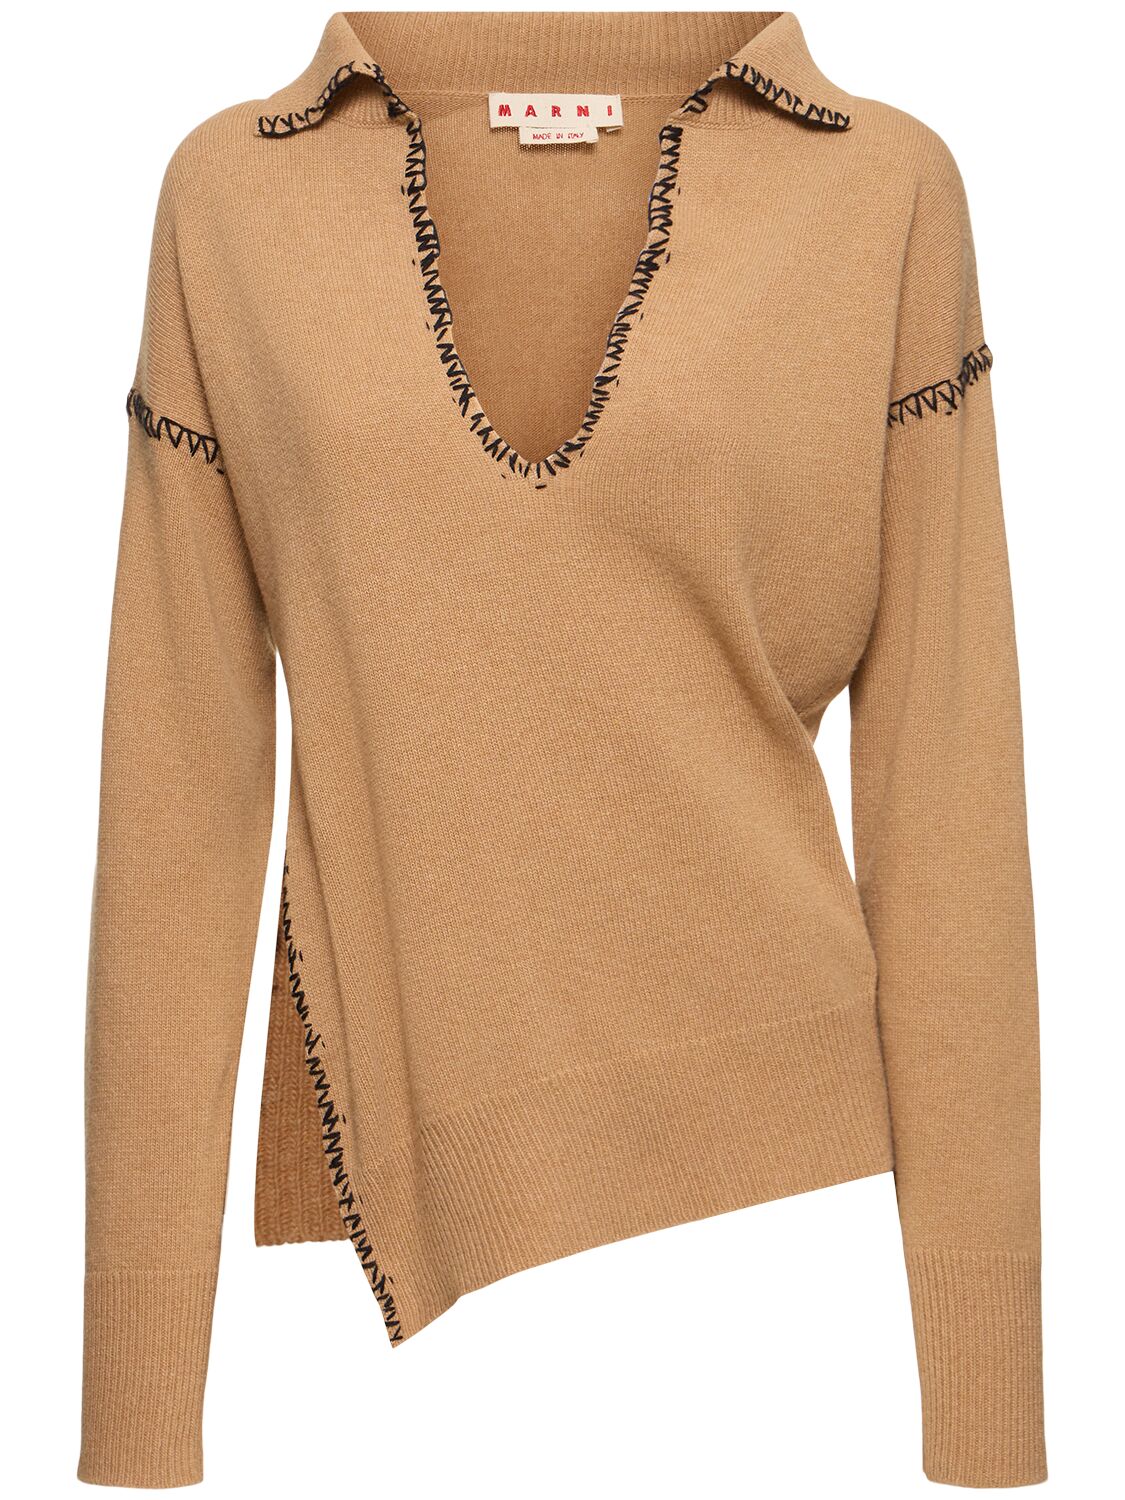 Marni Wool & Cashmere Knit V Neck Polo Jumper In Brown